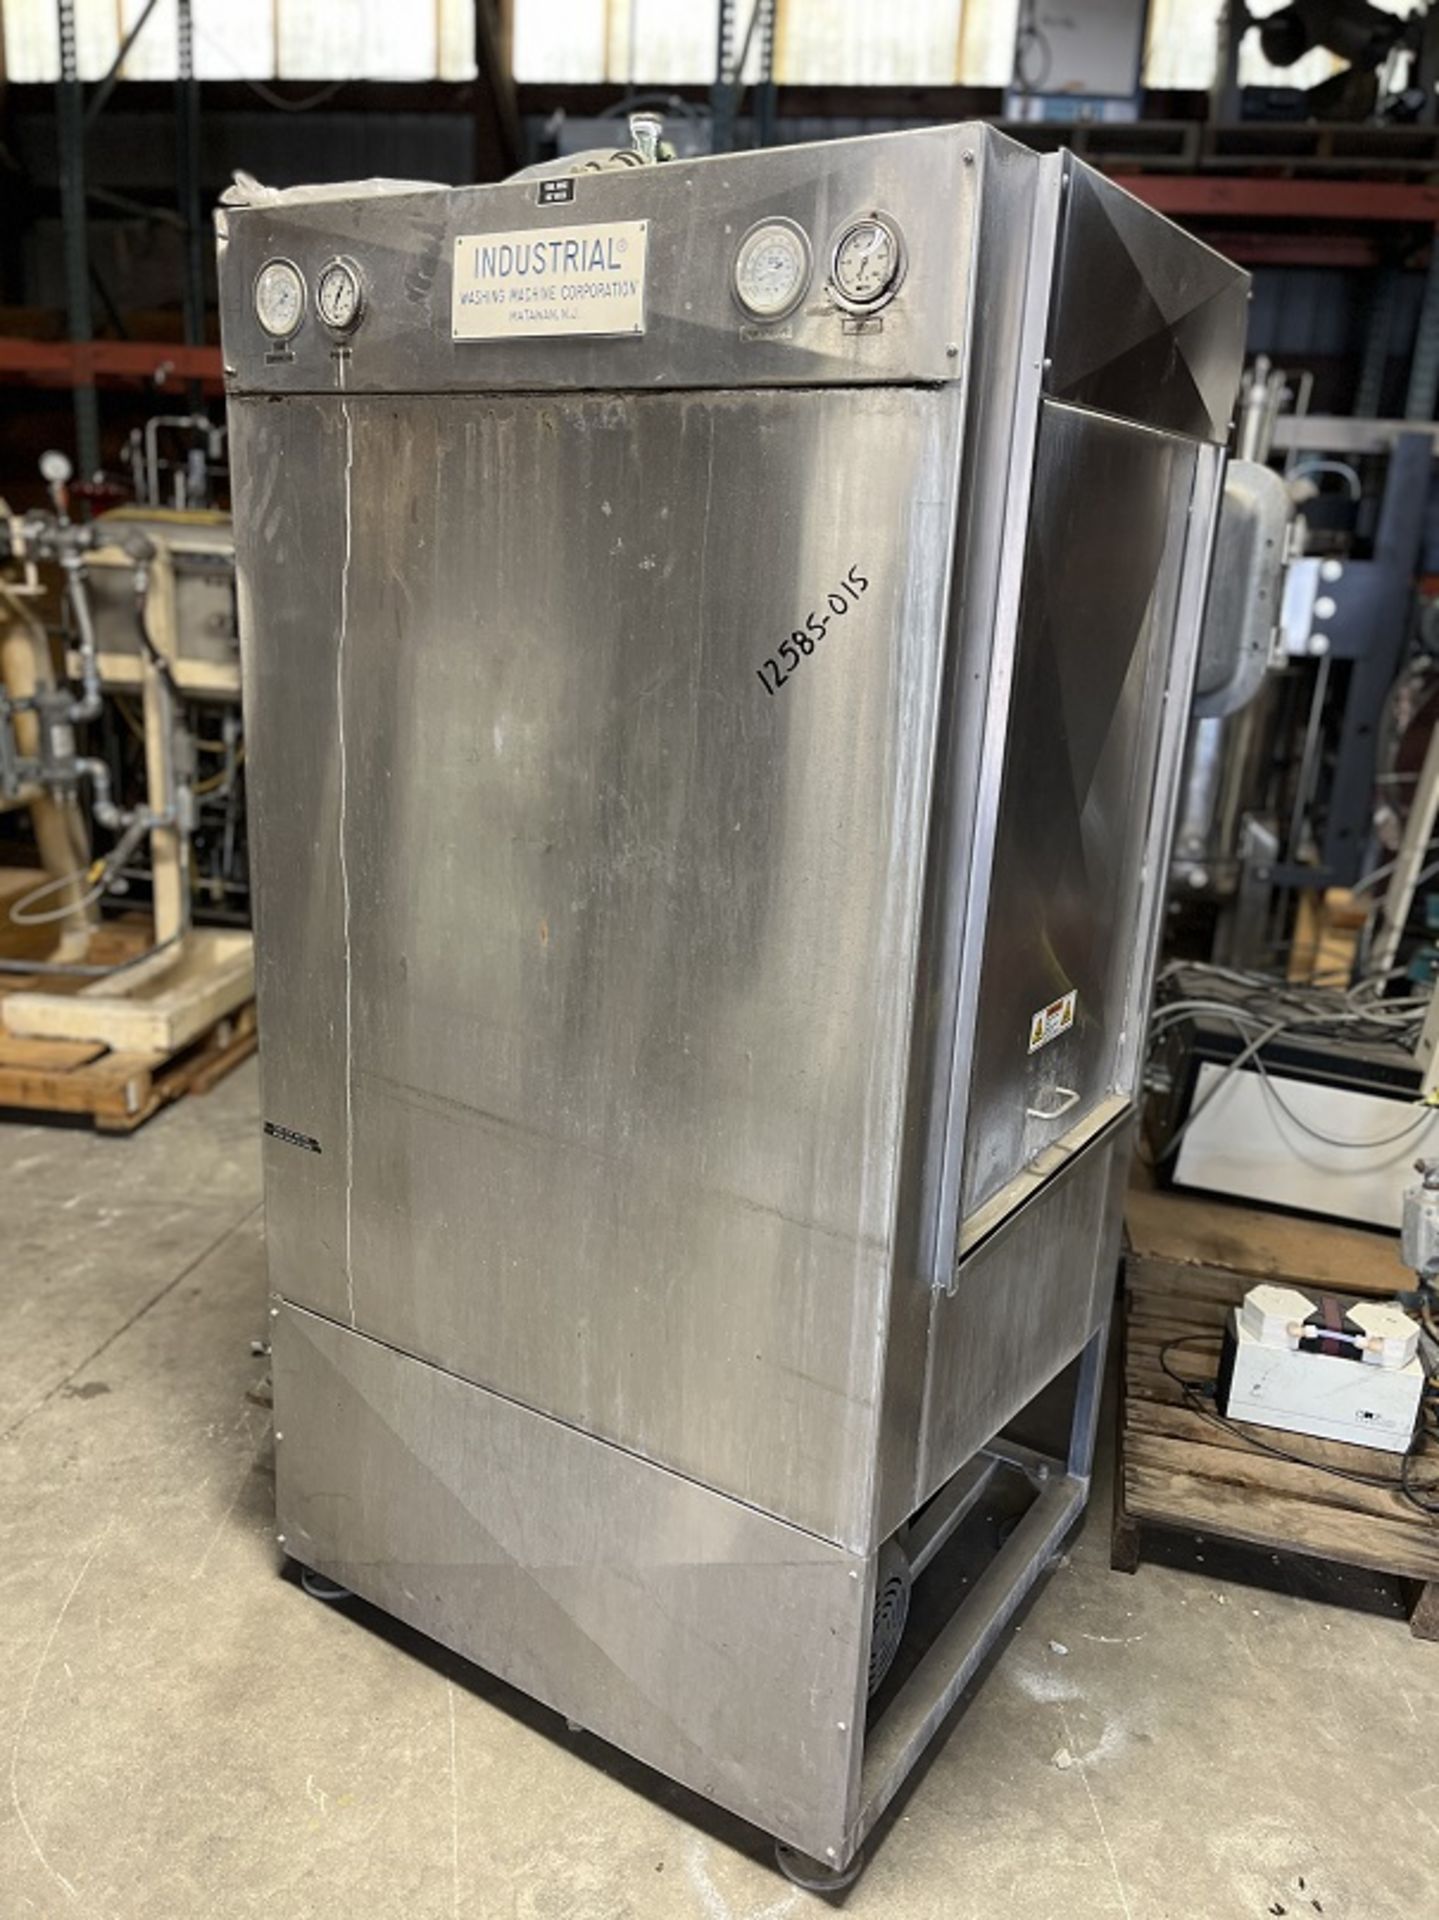 Used Industrial Washing Machine, Stainless Stee Construction, 24" x 36" Base, Single Door (Item #